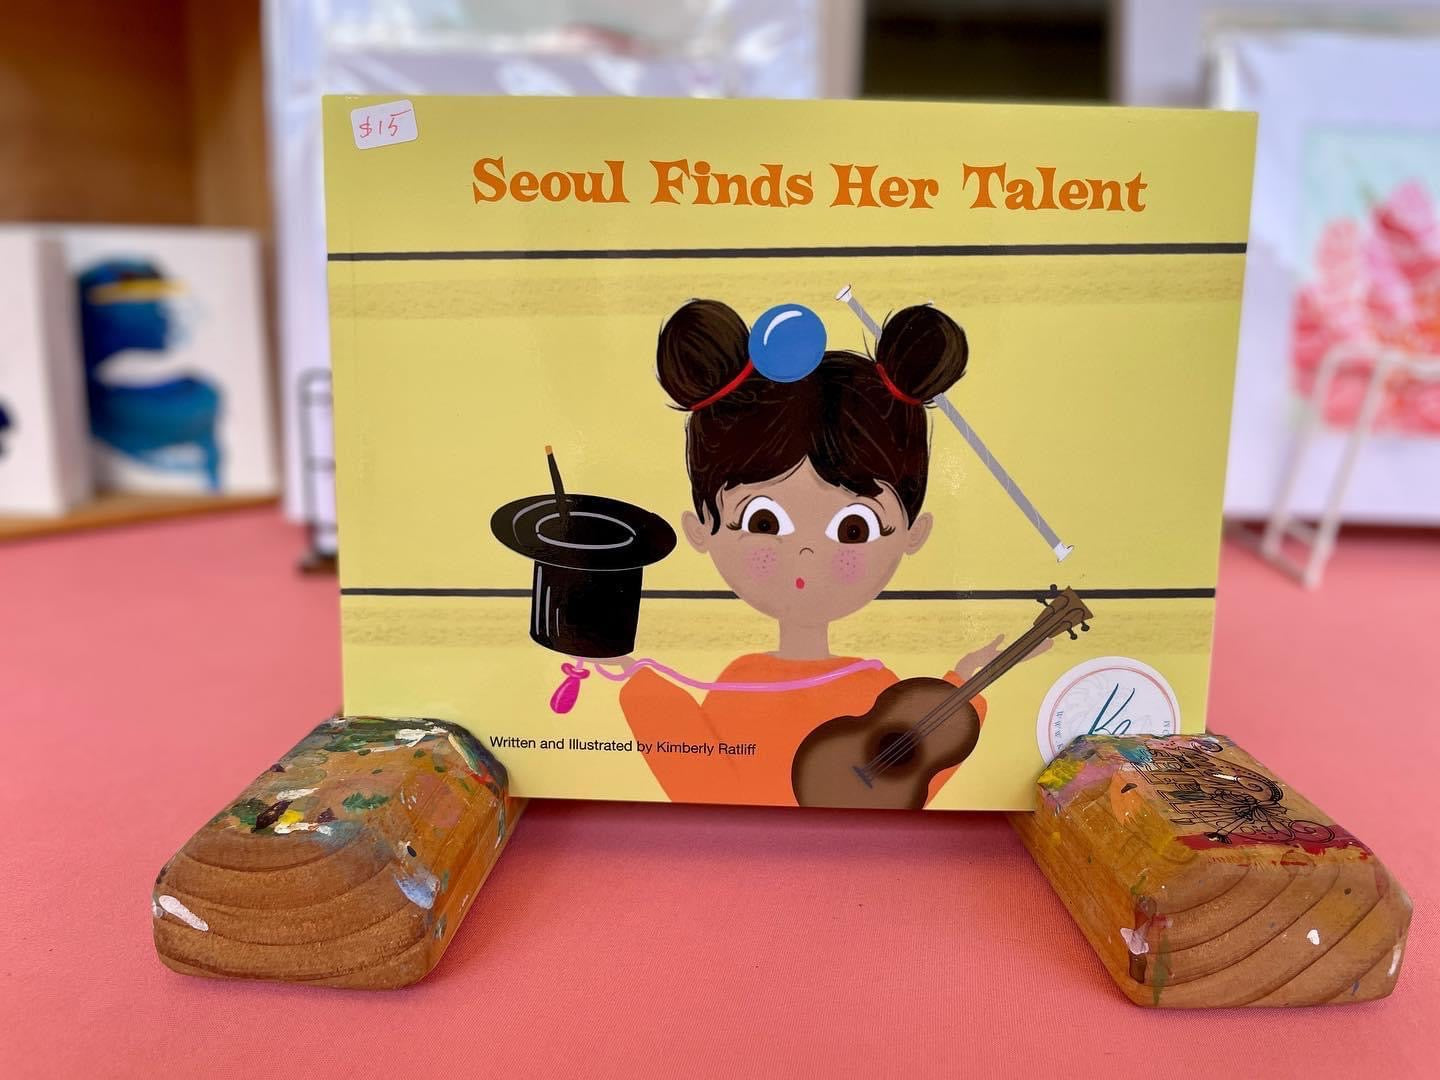 SIGNED copies of "Seoul Finds Her Talent"